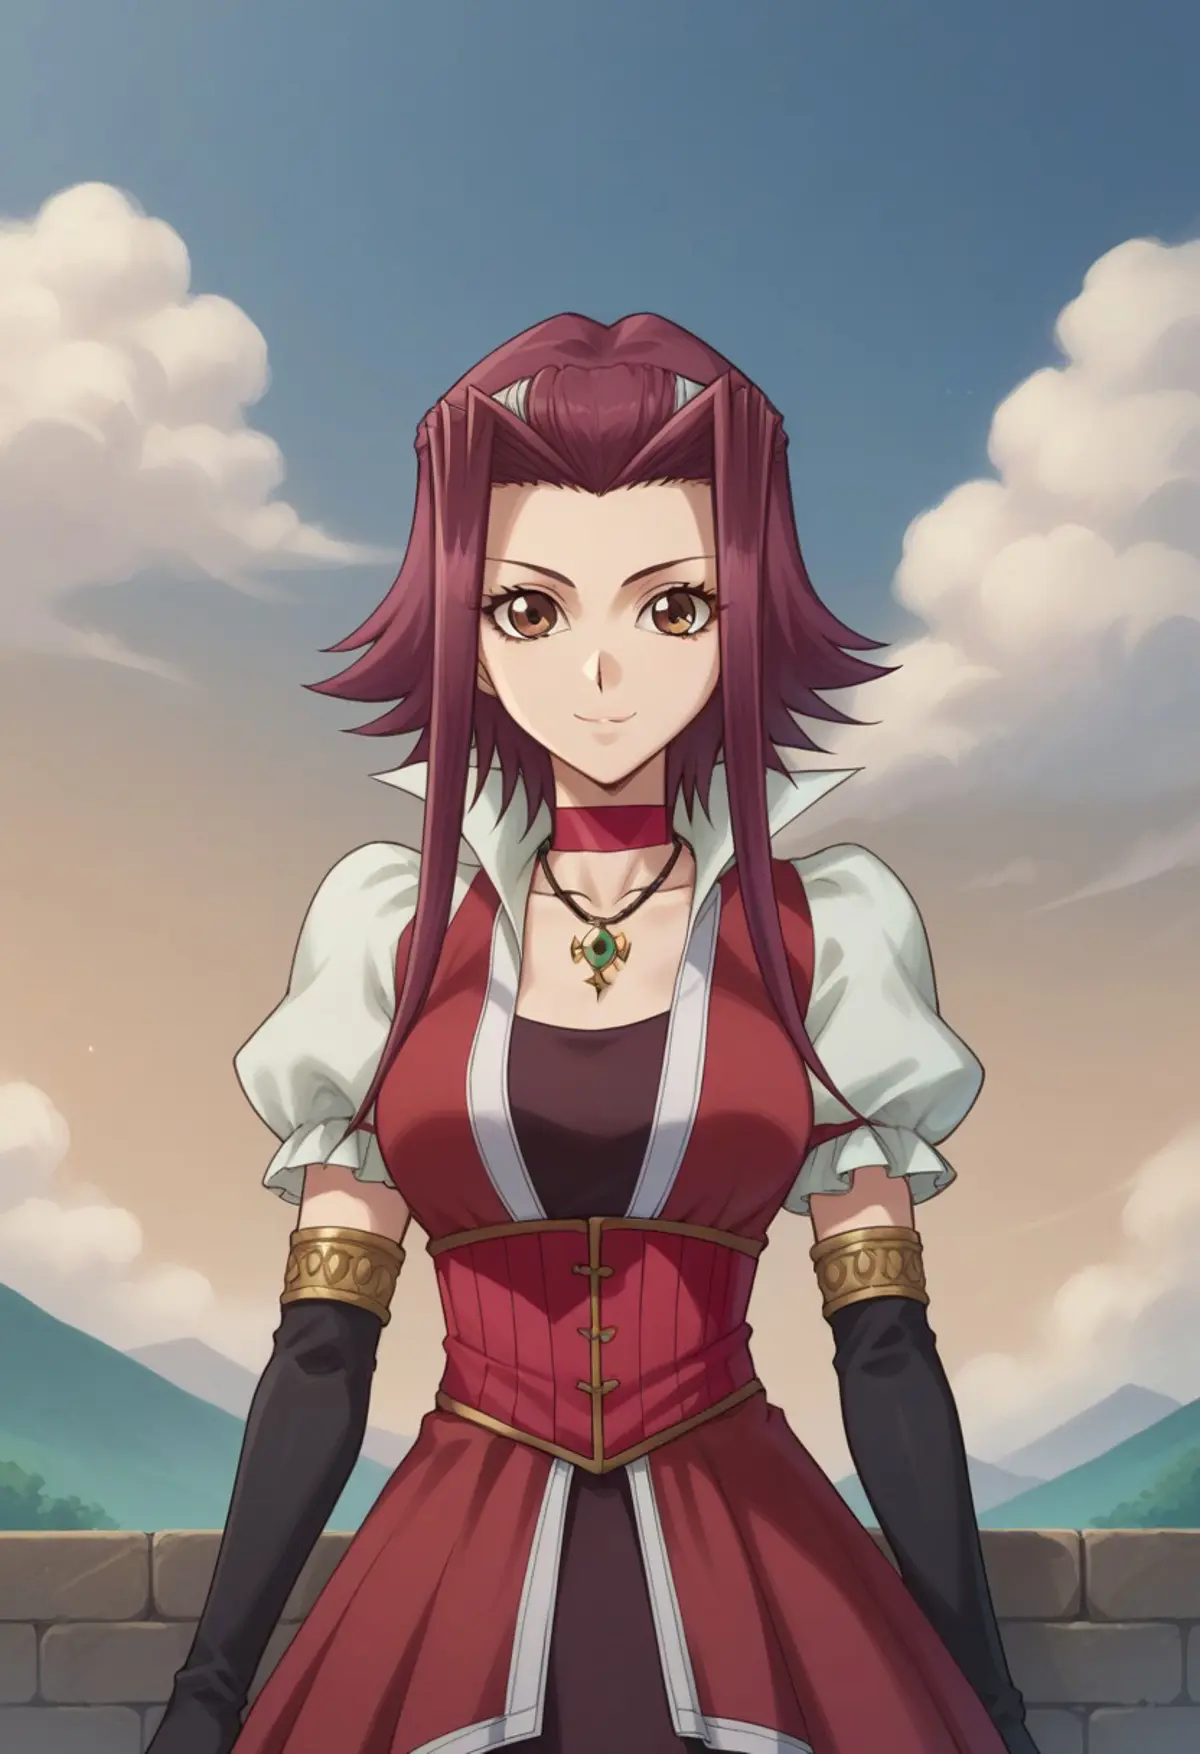 A young woman standing on front of a waist high wall, with a mountainous landscape stretching into the distance. She is dressed in a red and white outfit with a corset, puffy sleeves, and is wearing a green pendant necklace. 